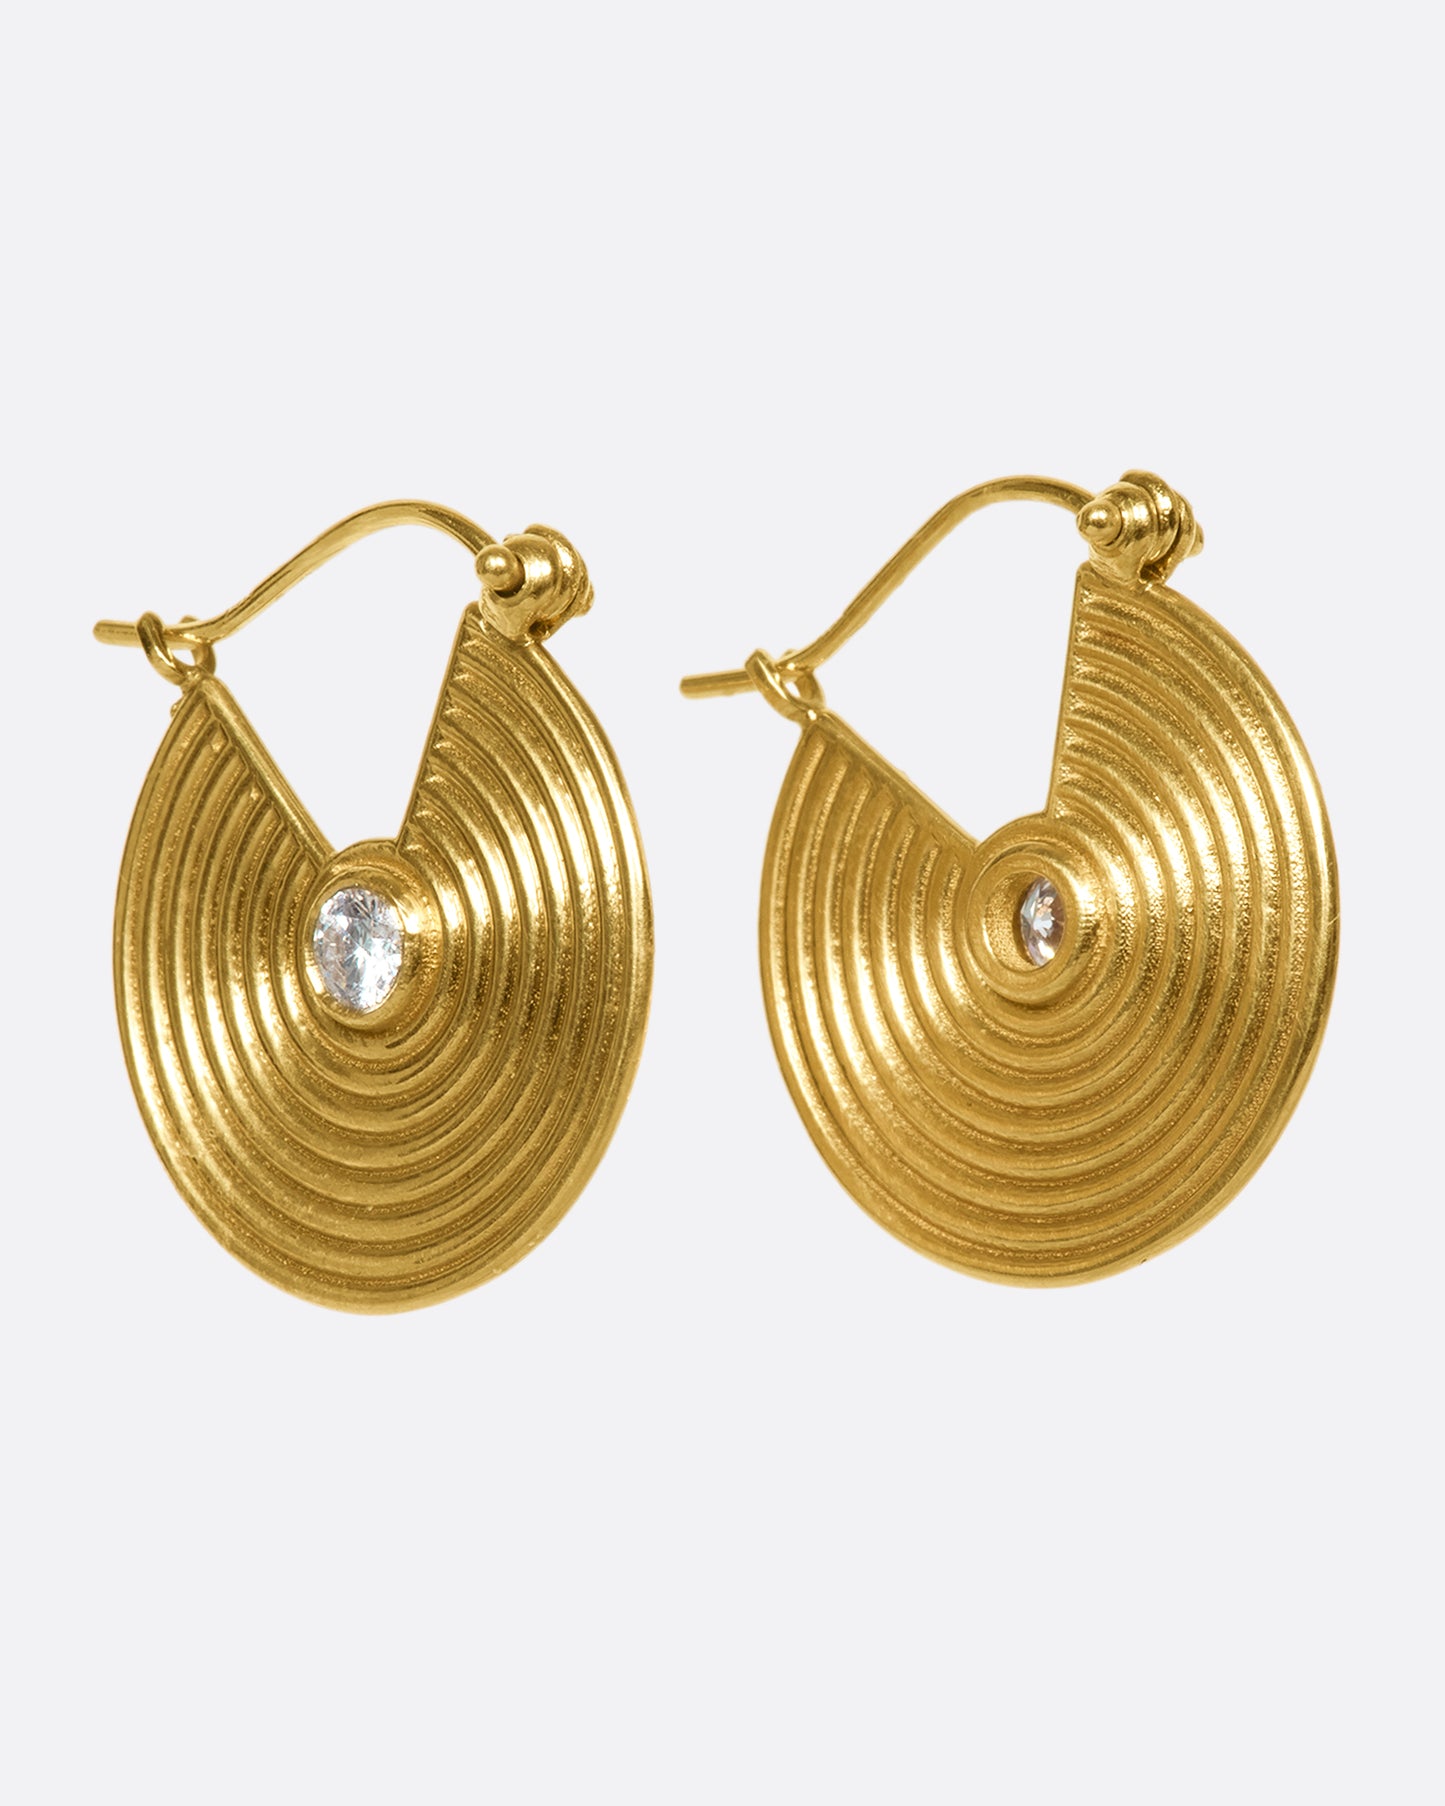 14k gold spiral hoops punctuated with white diamonds. Depending on the angle of your piercing, these may look like thin hoops or gold, ribbed discs from the front.